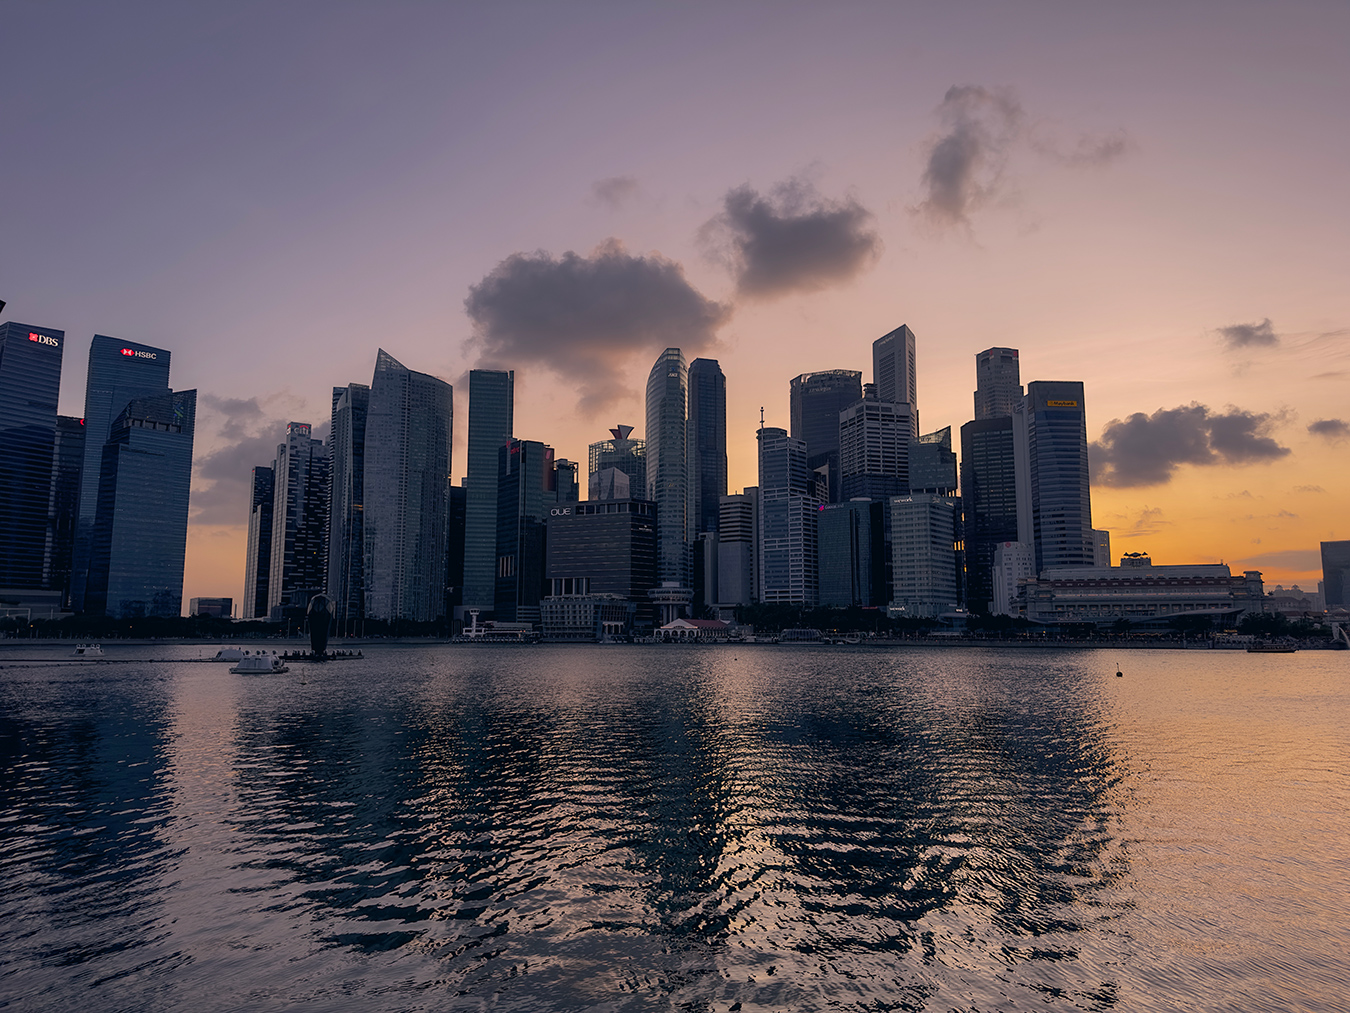 Finance District as seen from the Marina Bay at sunset